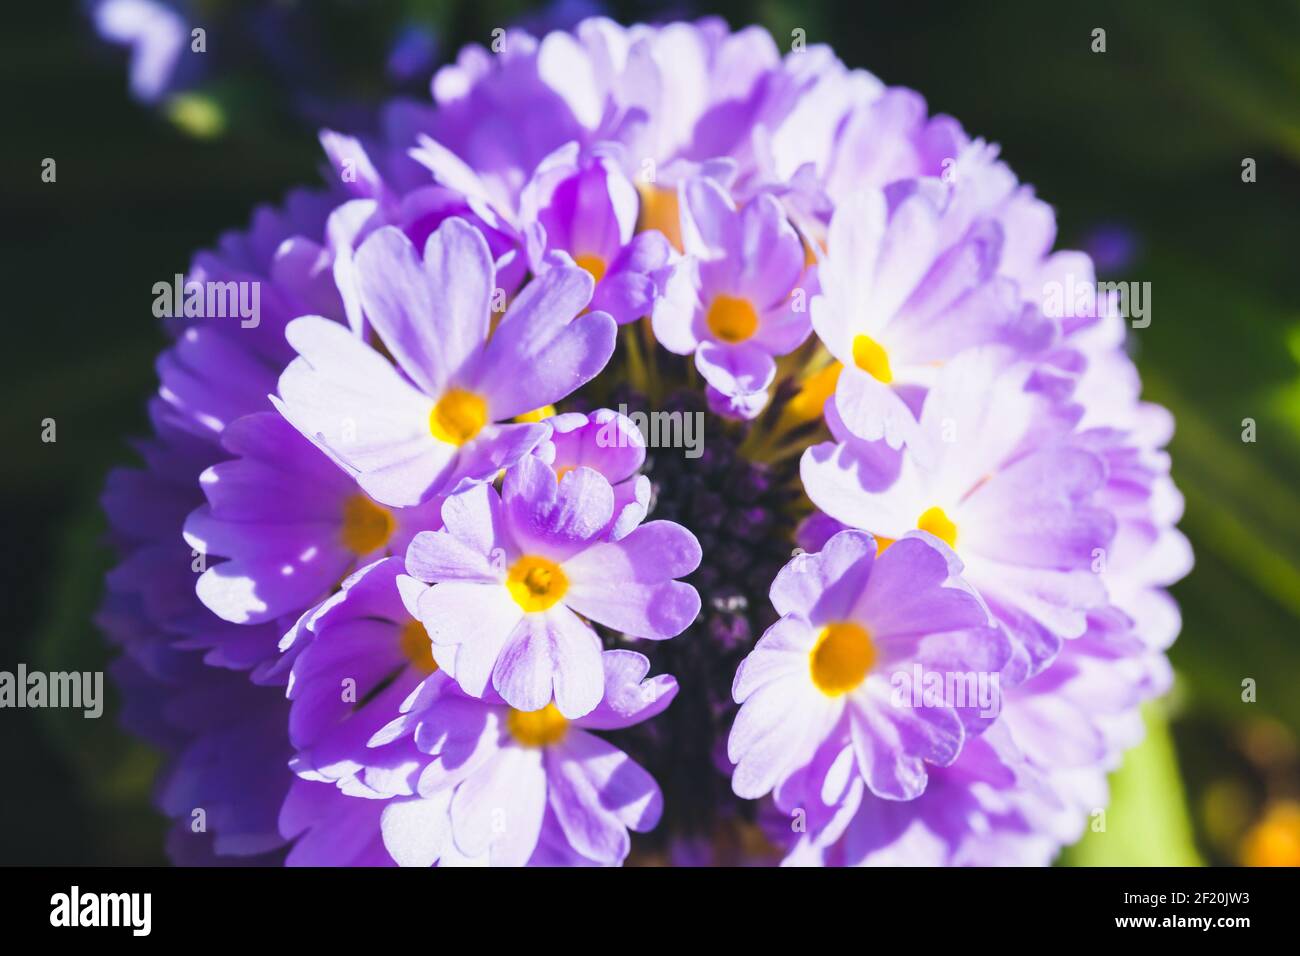 Bright spring flower, macro photo. Primula denticulata, or the drumstick primula, flowering plant in the family Primulaceae Stock Photo